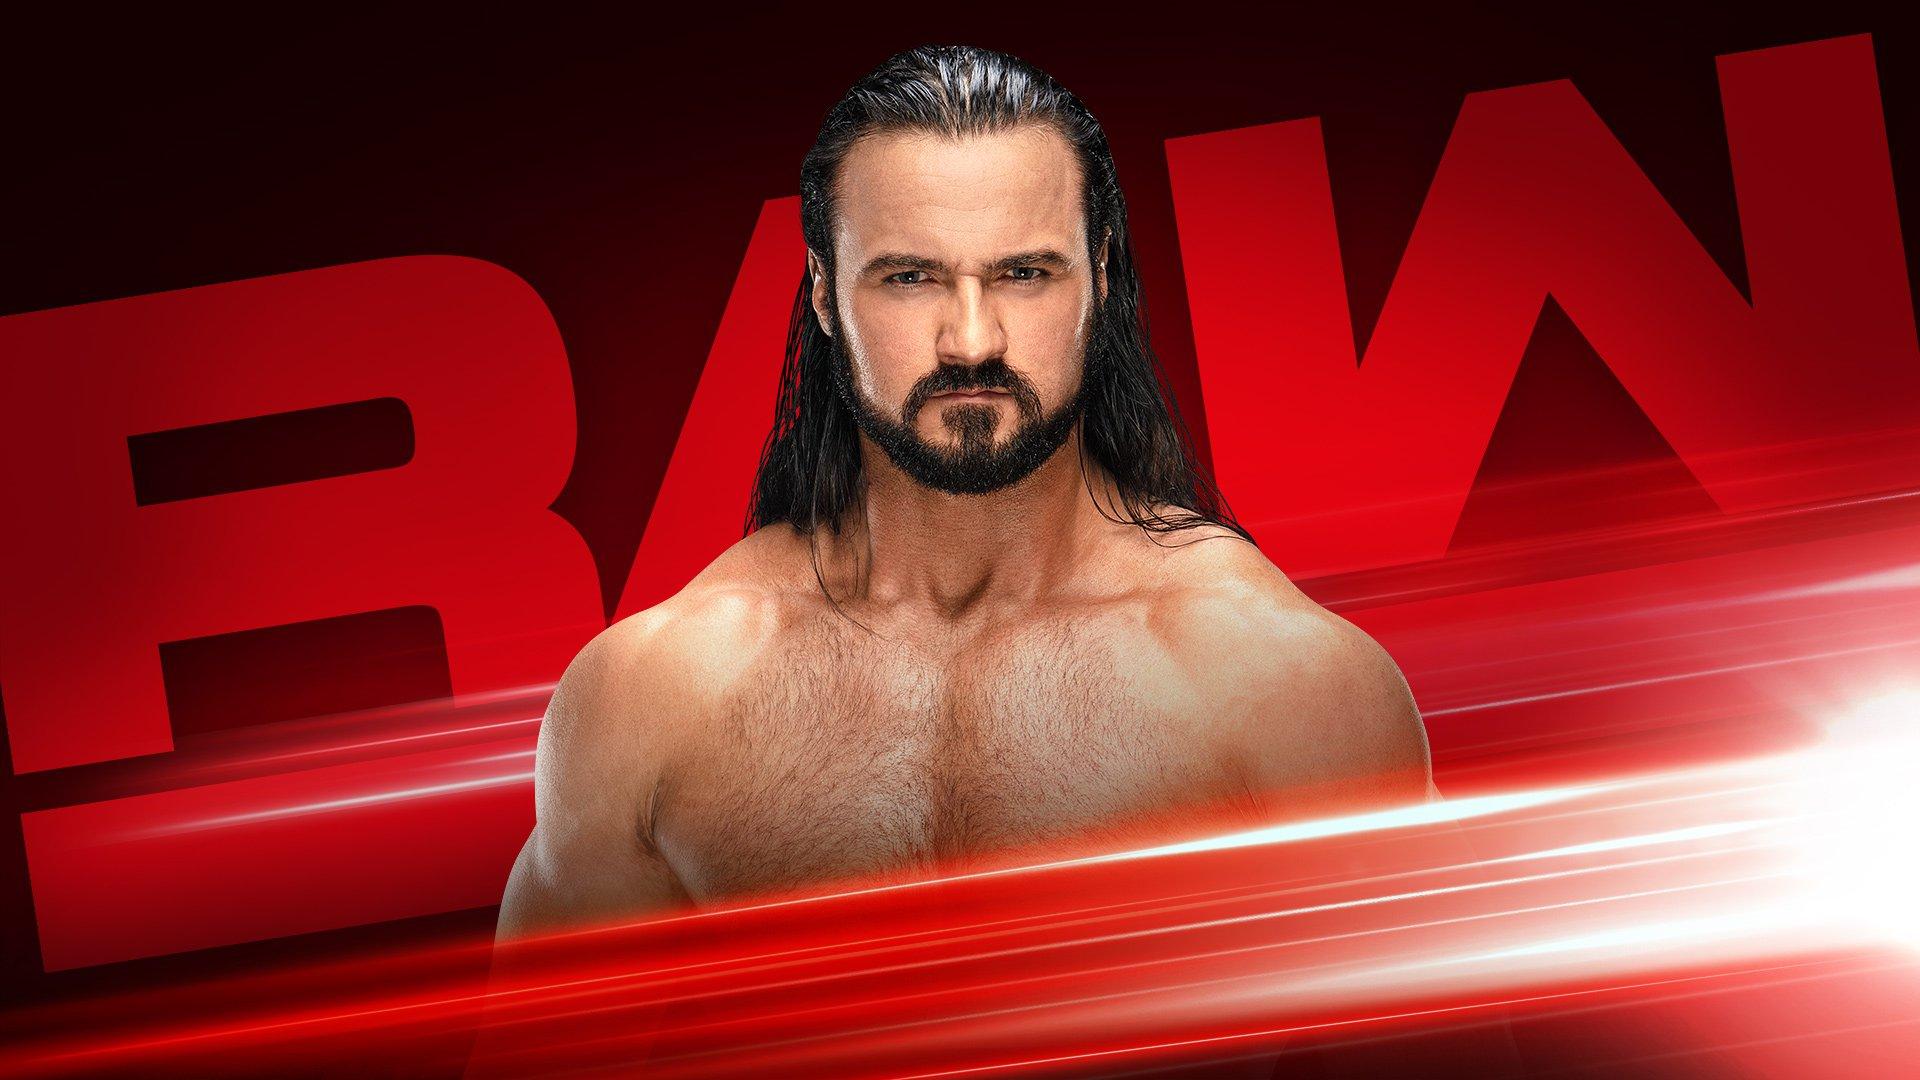 Here Is What You Can Expect To See On Tonight's Episode Of WWE RAW From